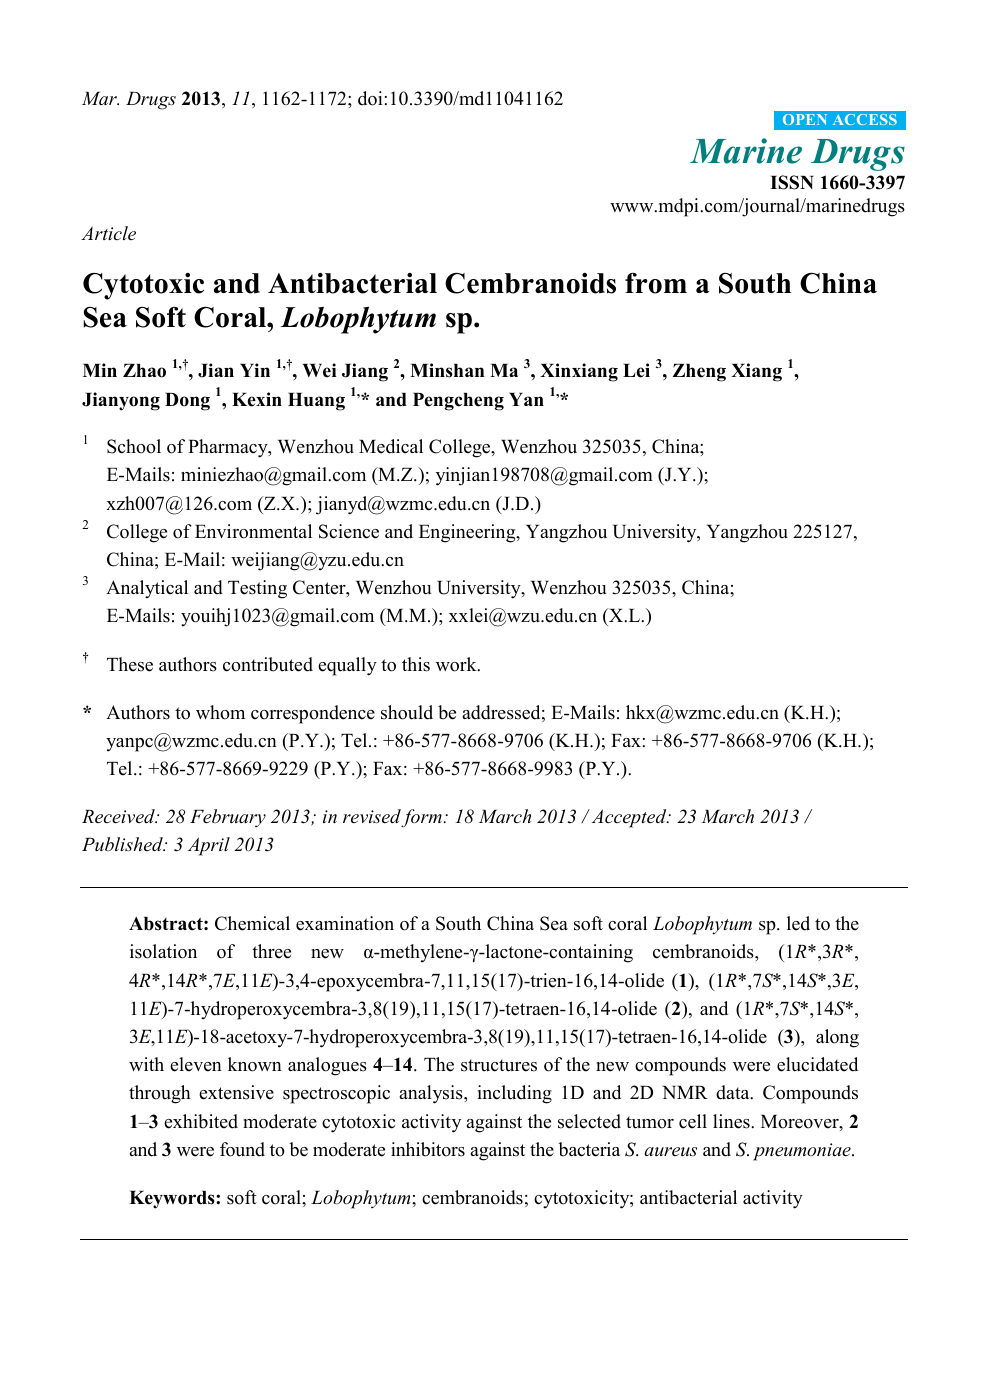 Cytotoxic And Antibacterial Cembranoids From A South China Sea Soft Coral Lobophytum Sp Topic Of Research Paper In Chemical Sciences Download Scholarly Article Pdf And Read For Free On Cyberleninka Open